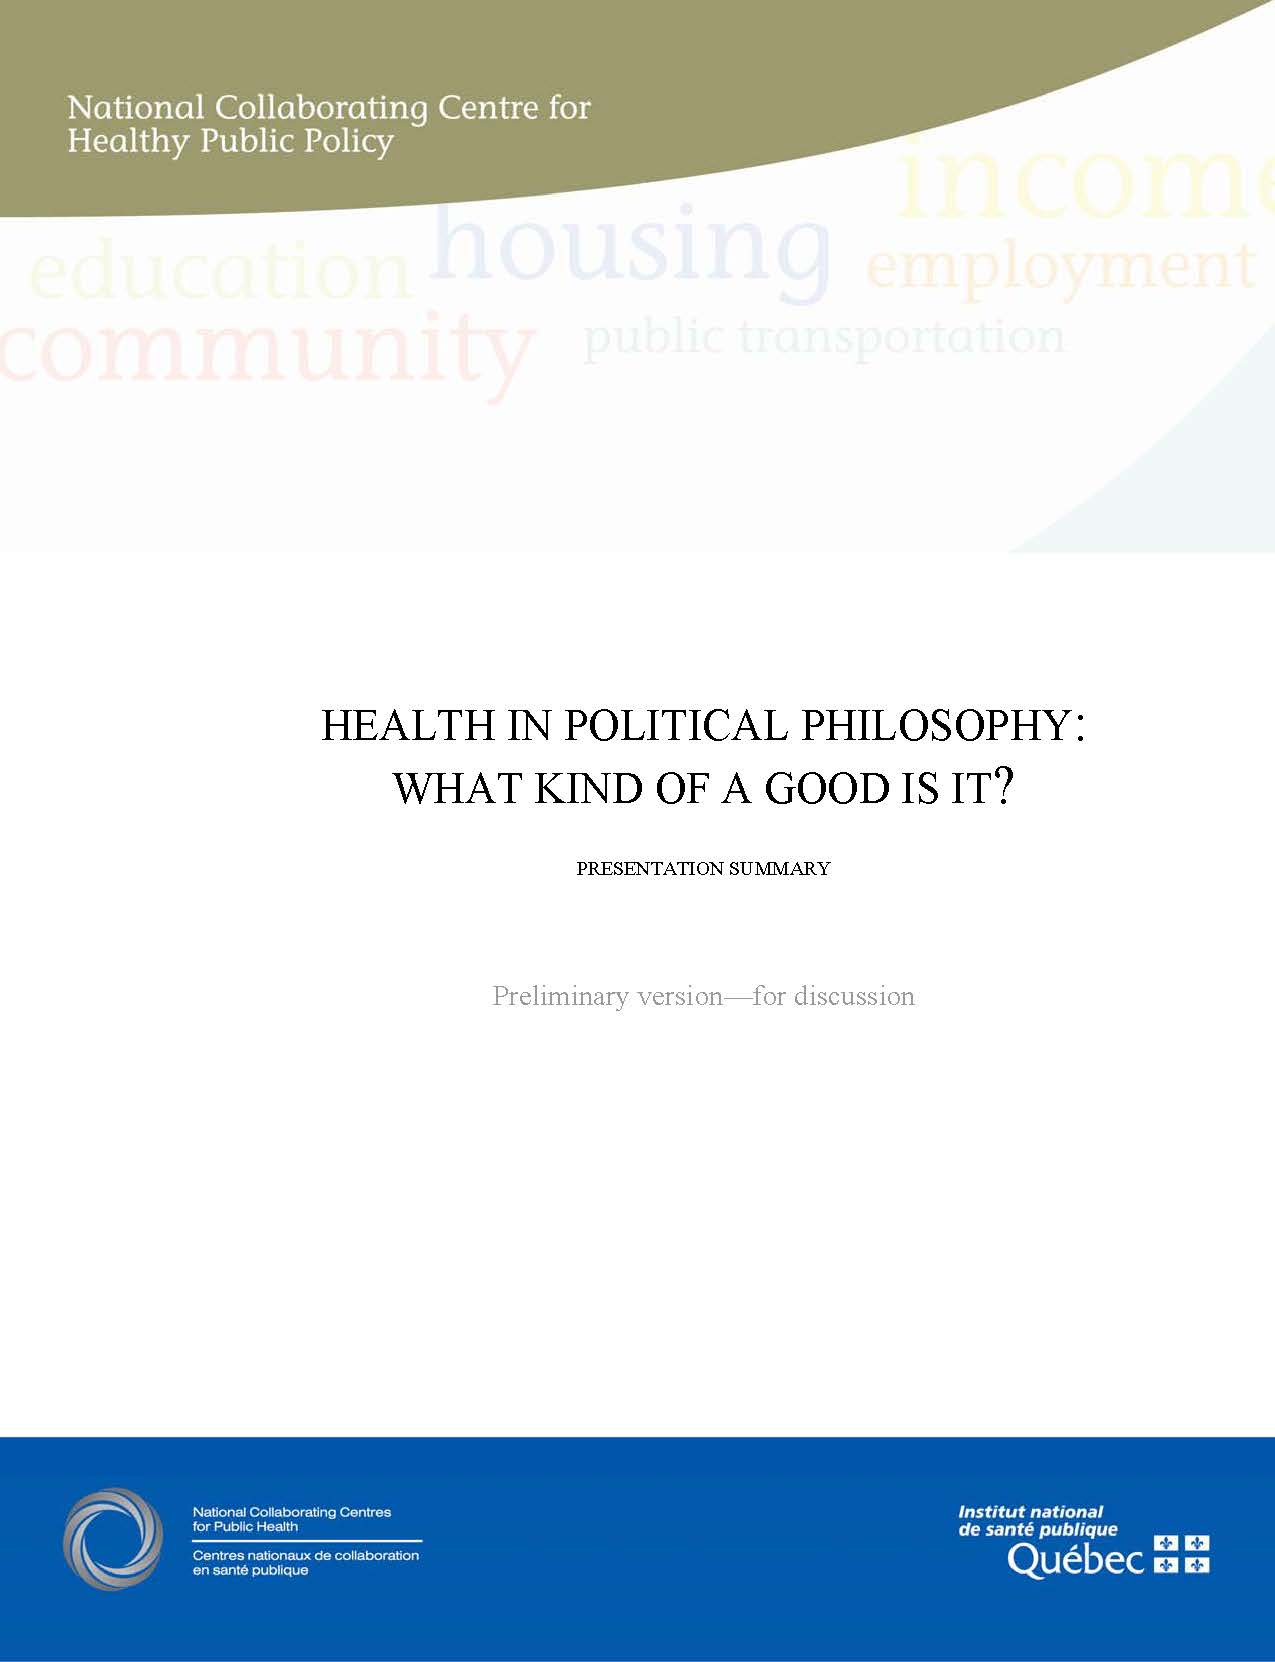 Health in Political Philosophy: What Kind of Good is it?